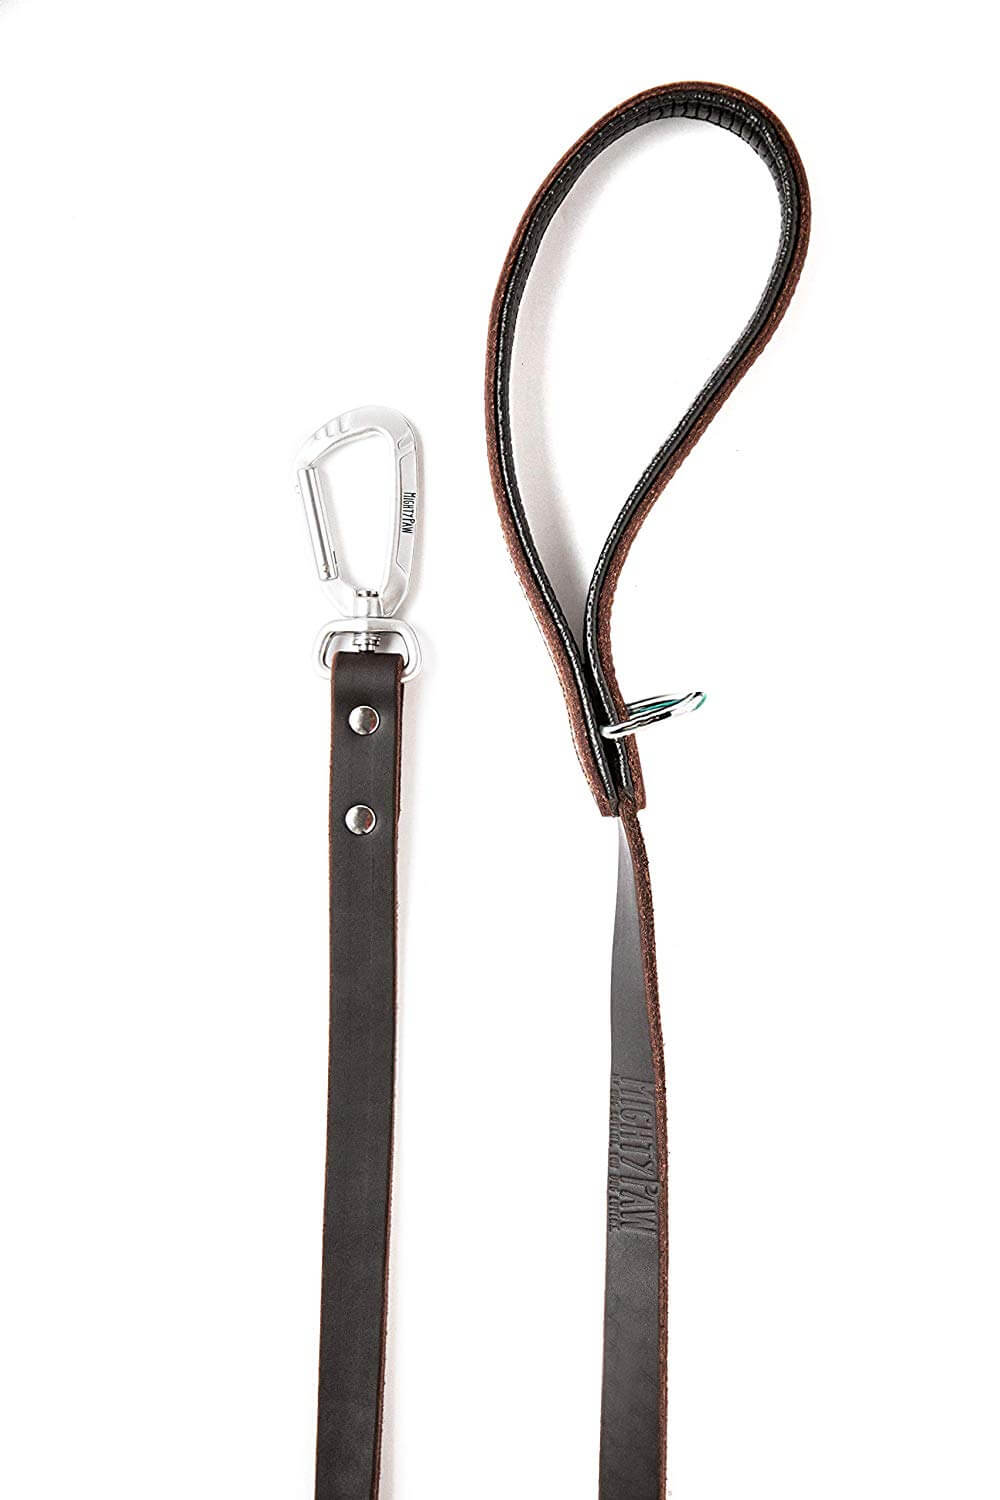 6ft Dog Leash, Strong Durable Leather Dog Leash, Genuine Leather Braided Dog  Leash, Soft and Comfortable Leather Leash for Large, Medium and Small Dogs  Training… : : Pet Supplies